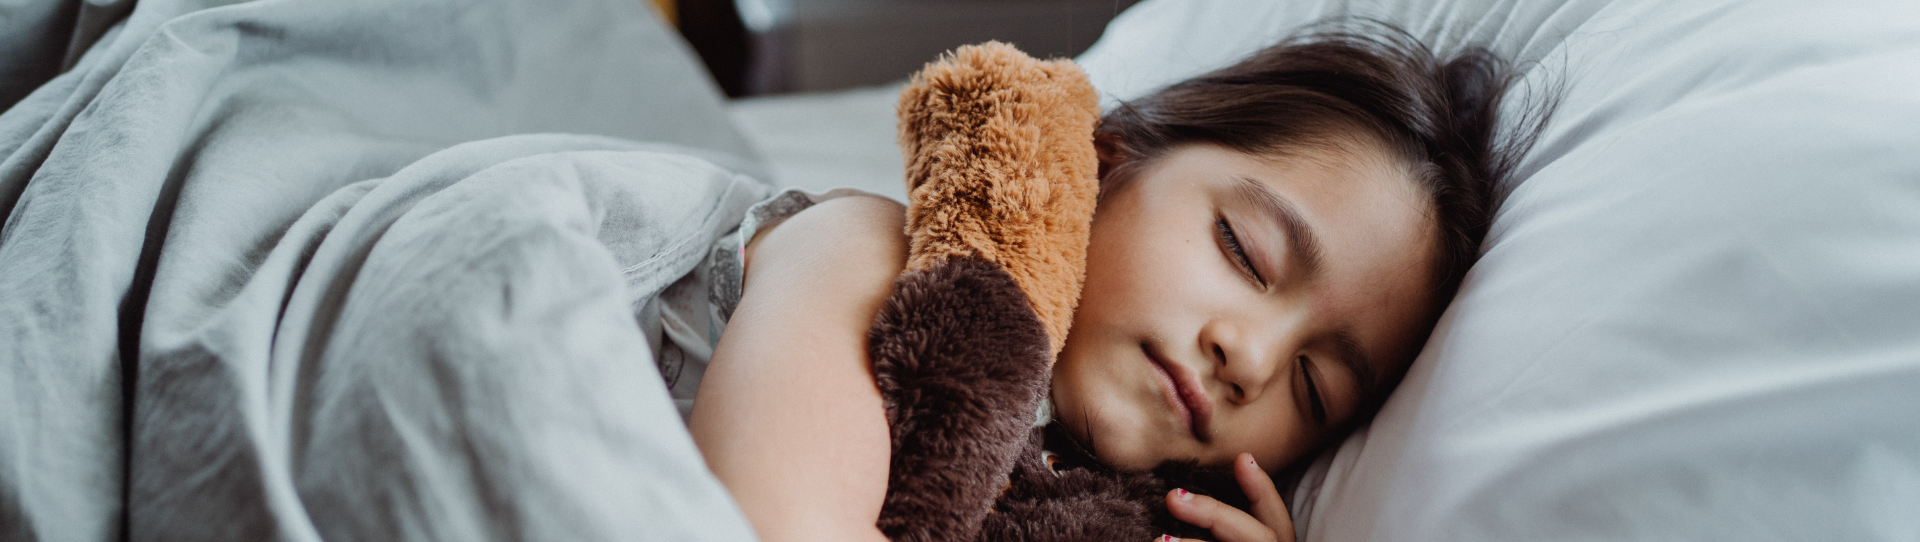 Secrets To Put Your Kids To Sleep On Their Back-To-School Routine